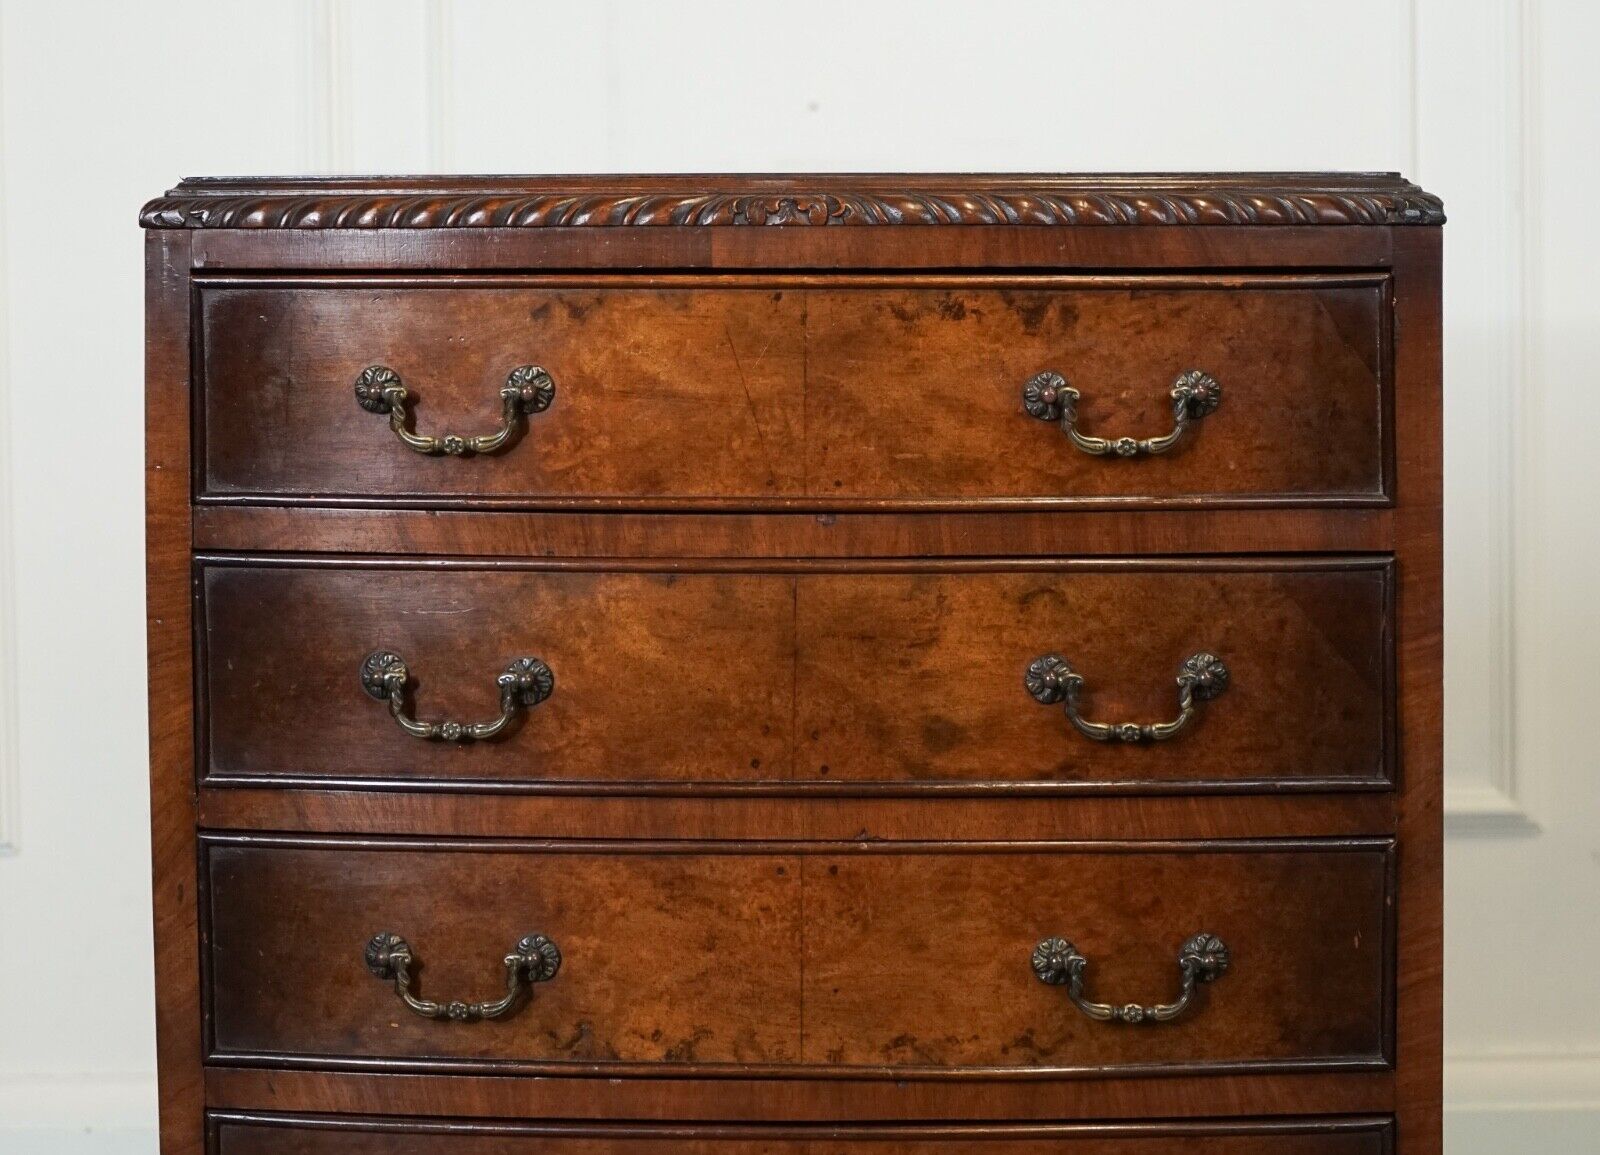 FIGURED VICTORIAN WALNUT BOW FRONTED CHEST OF DRAWERS RAISED ON QUEEN ANNE LEGS